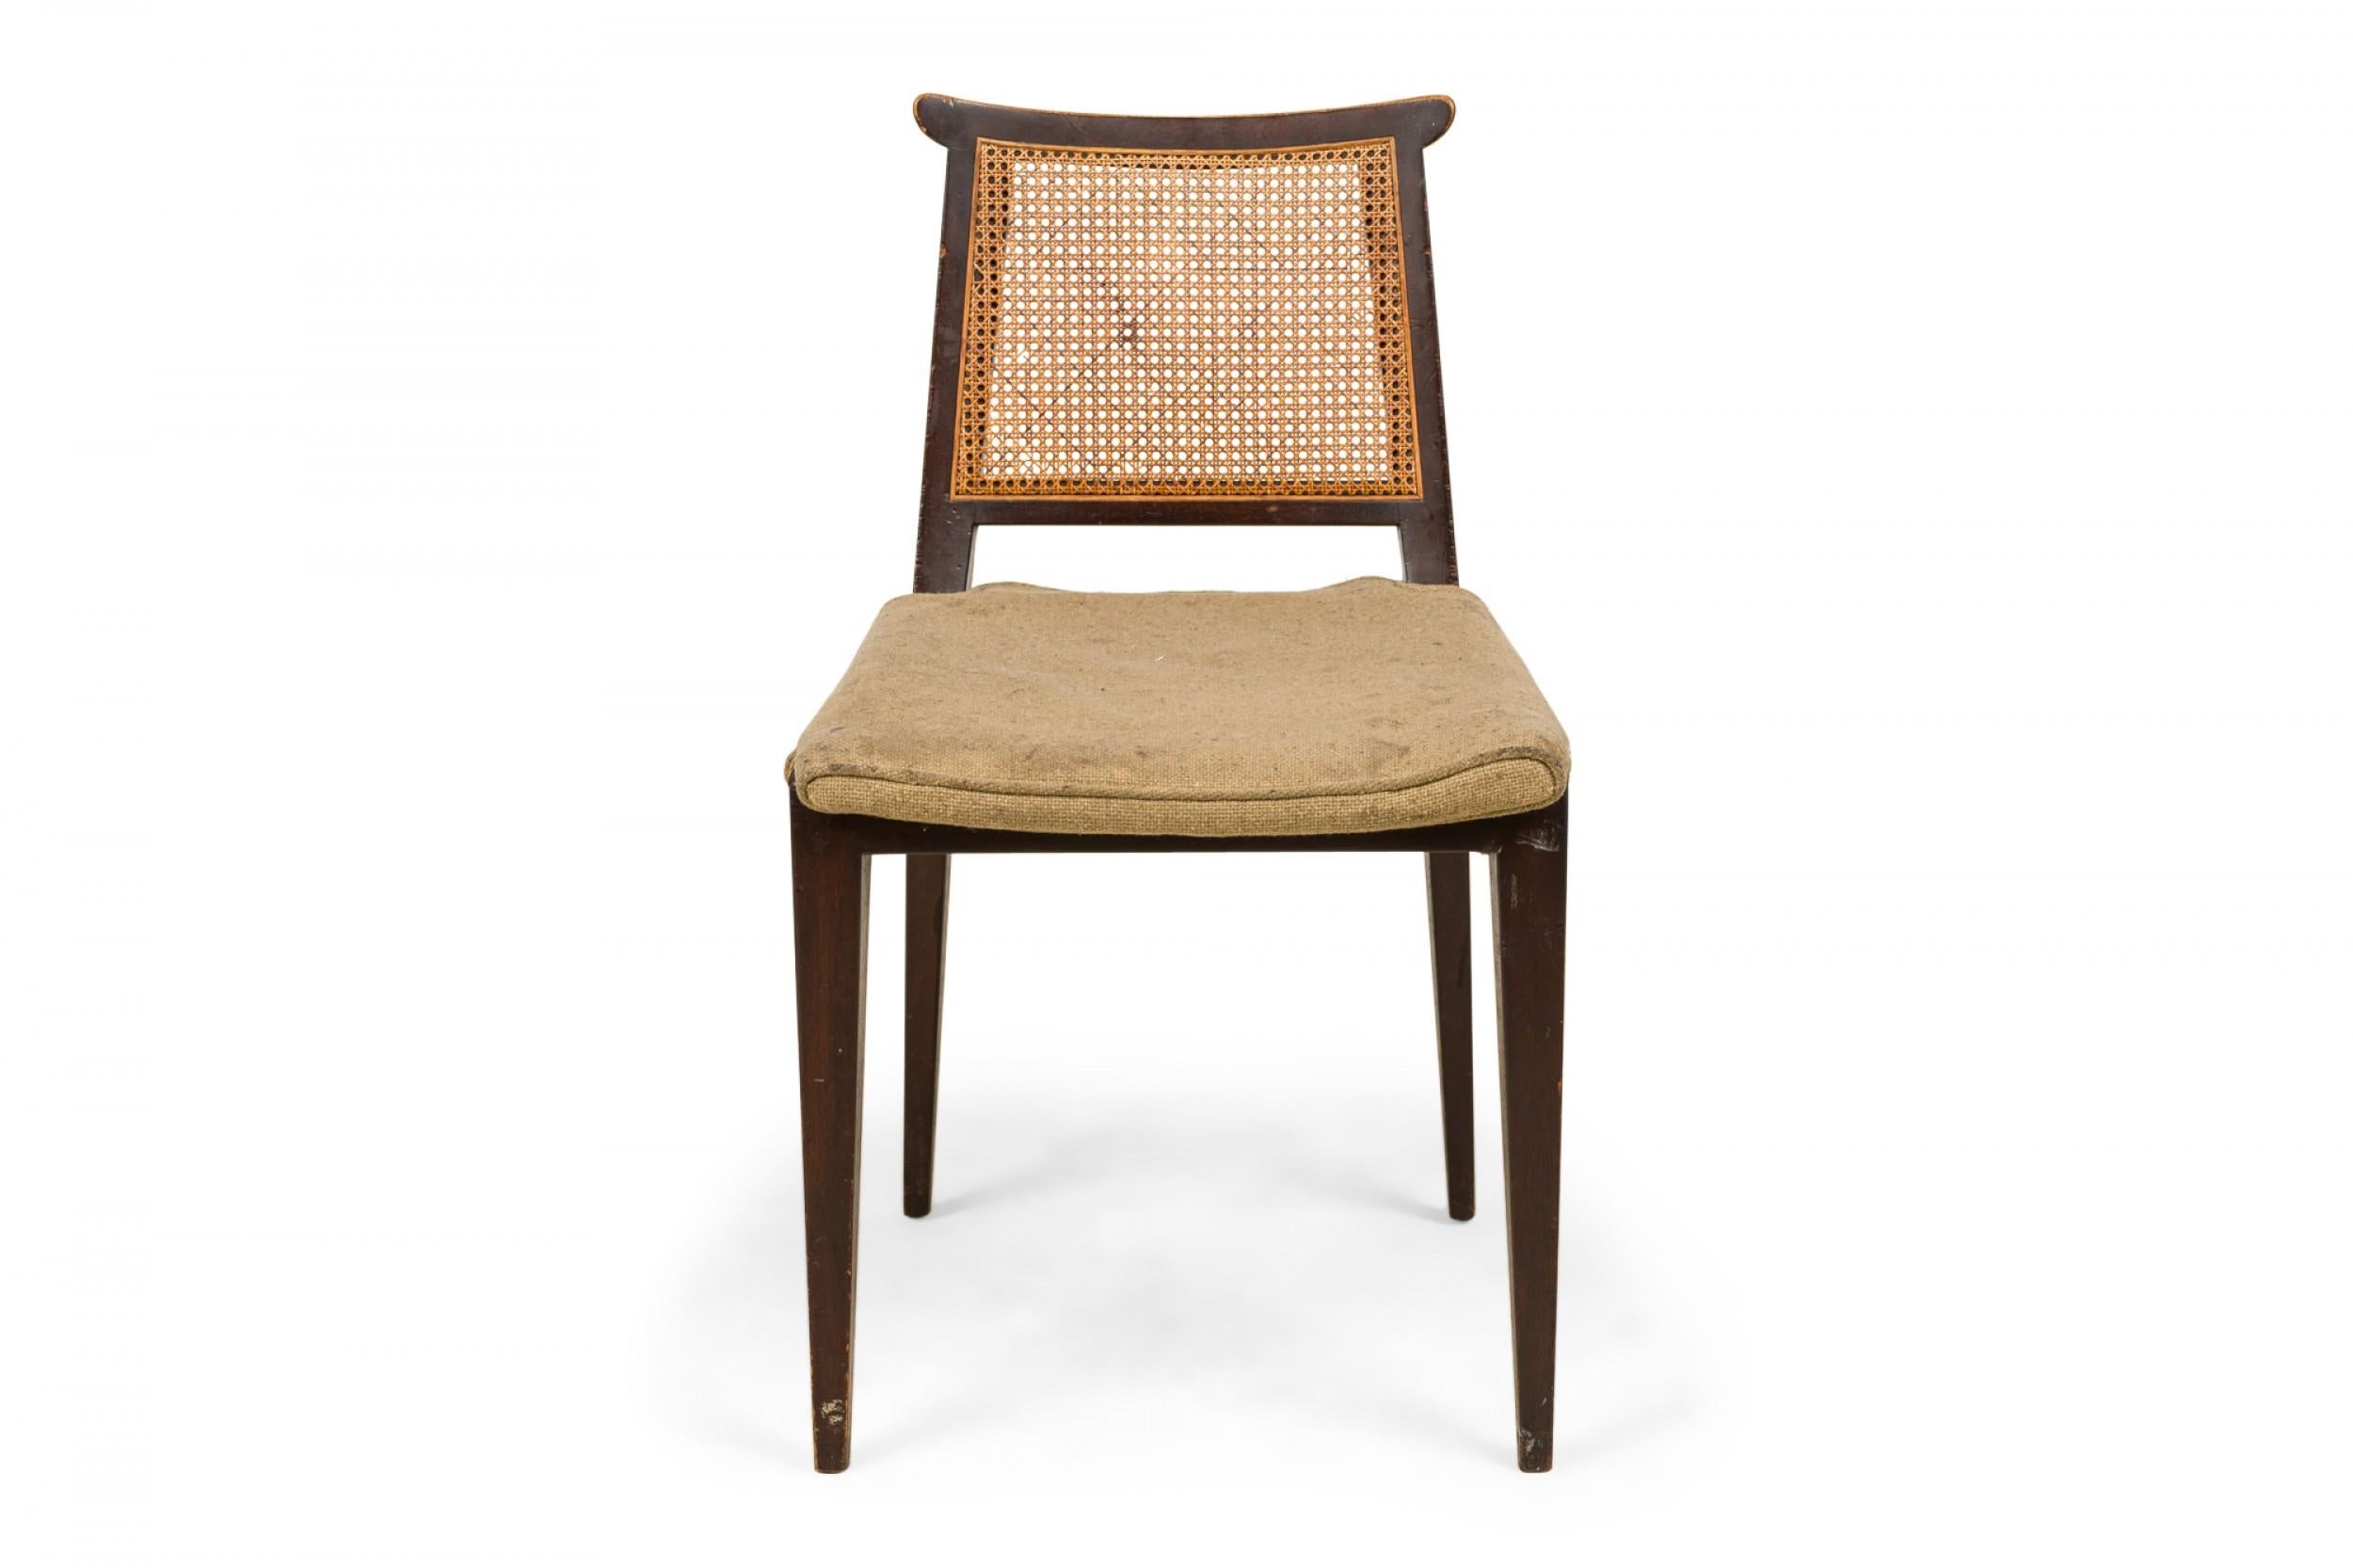 American Mid-Century side chair with a dark stained wooden frame, beige textured fabric upholstered seat, and caned back, resting on four tapered square legs. (EDWARD WORMLEY FOR DUNBAR FURNITURE COMPANY)
